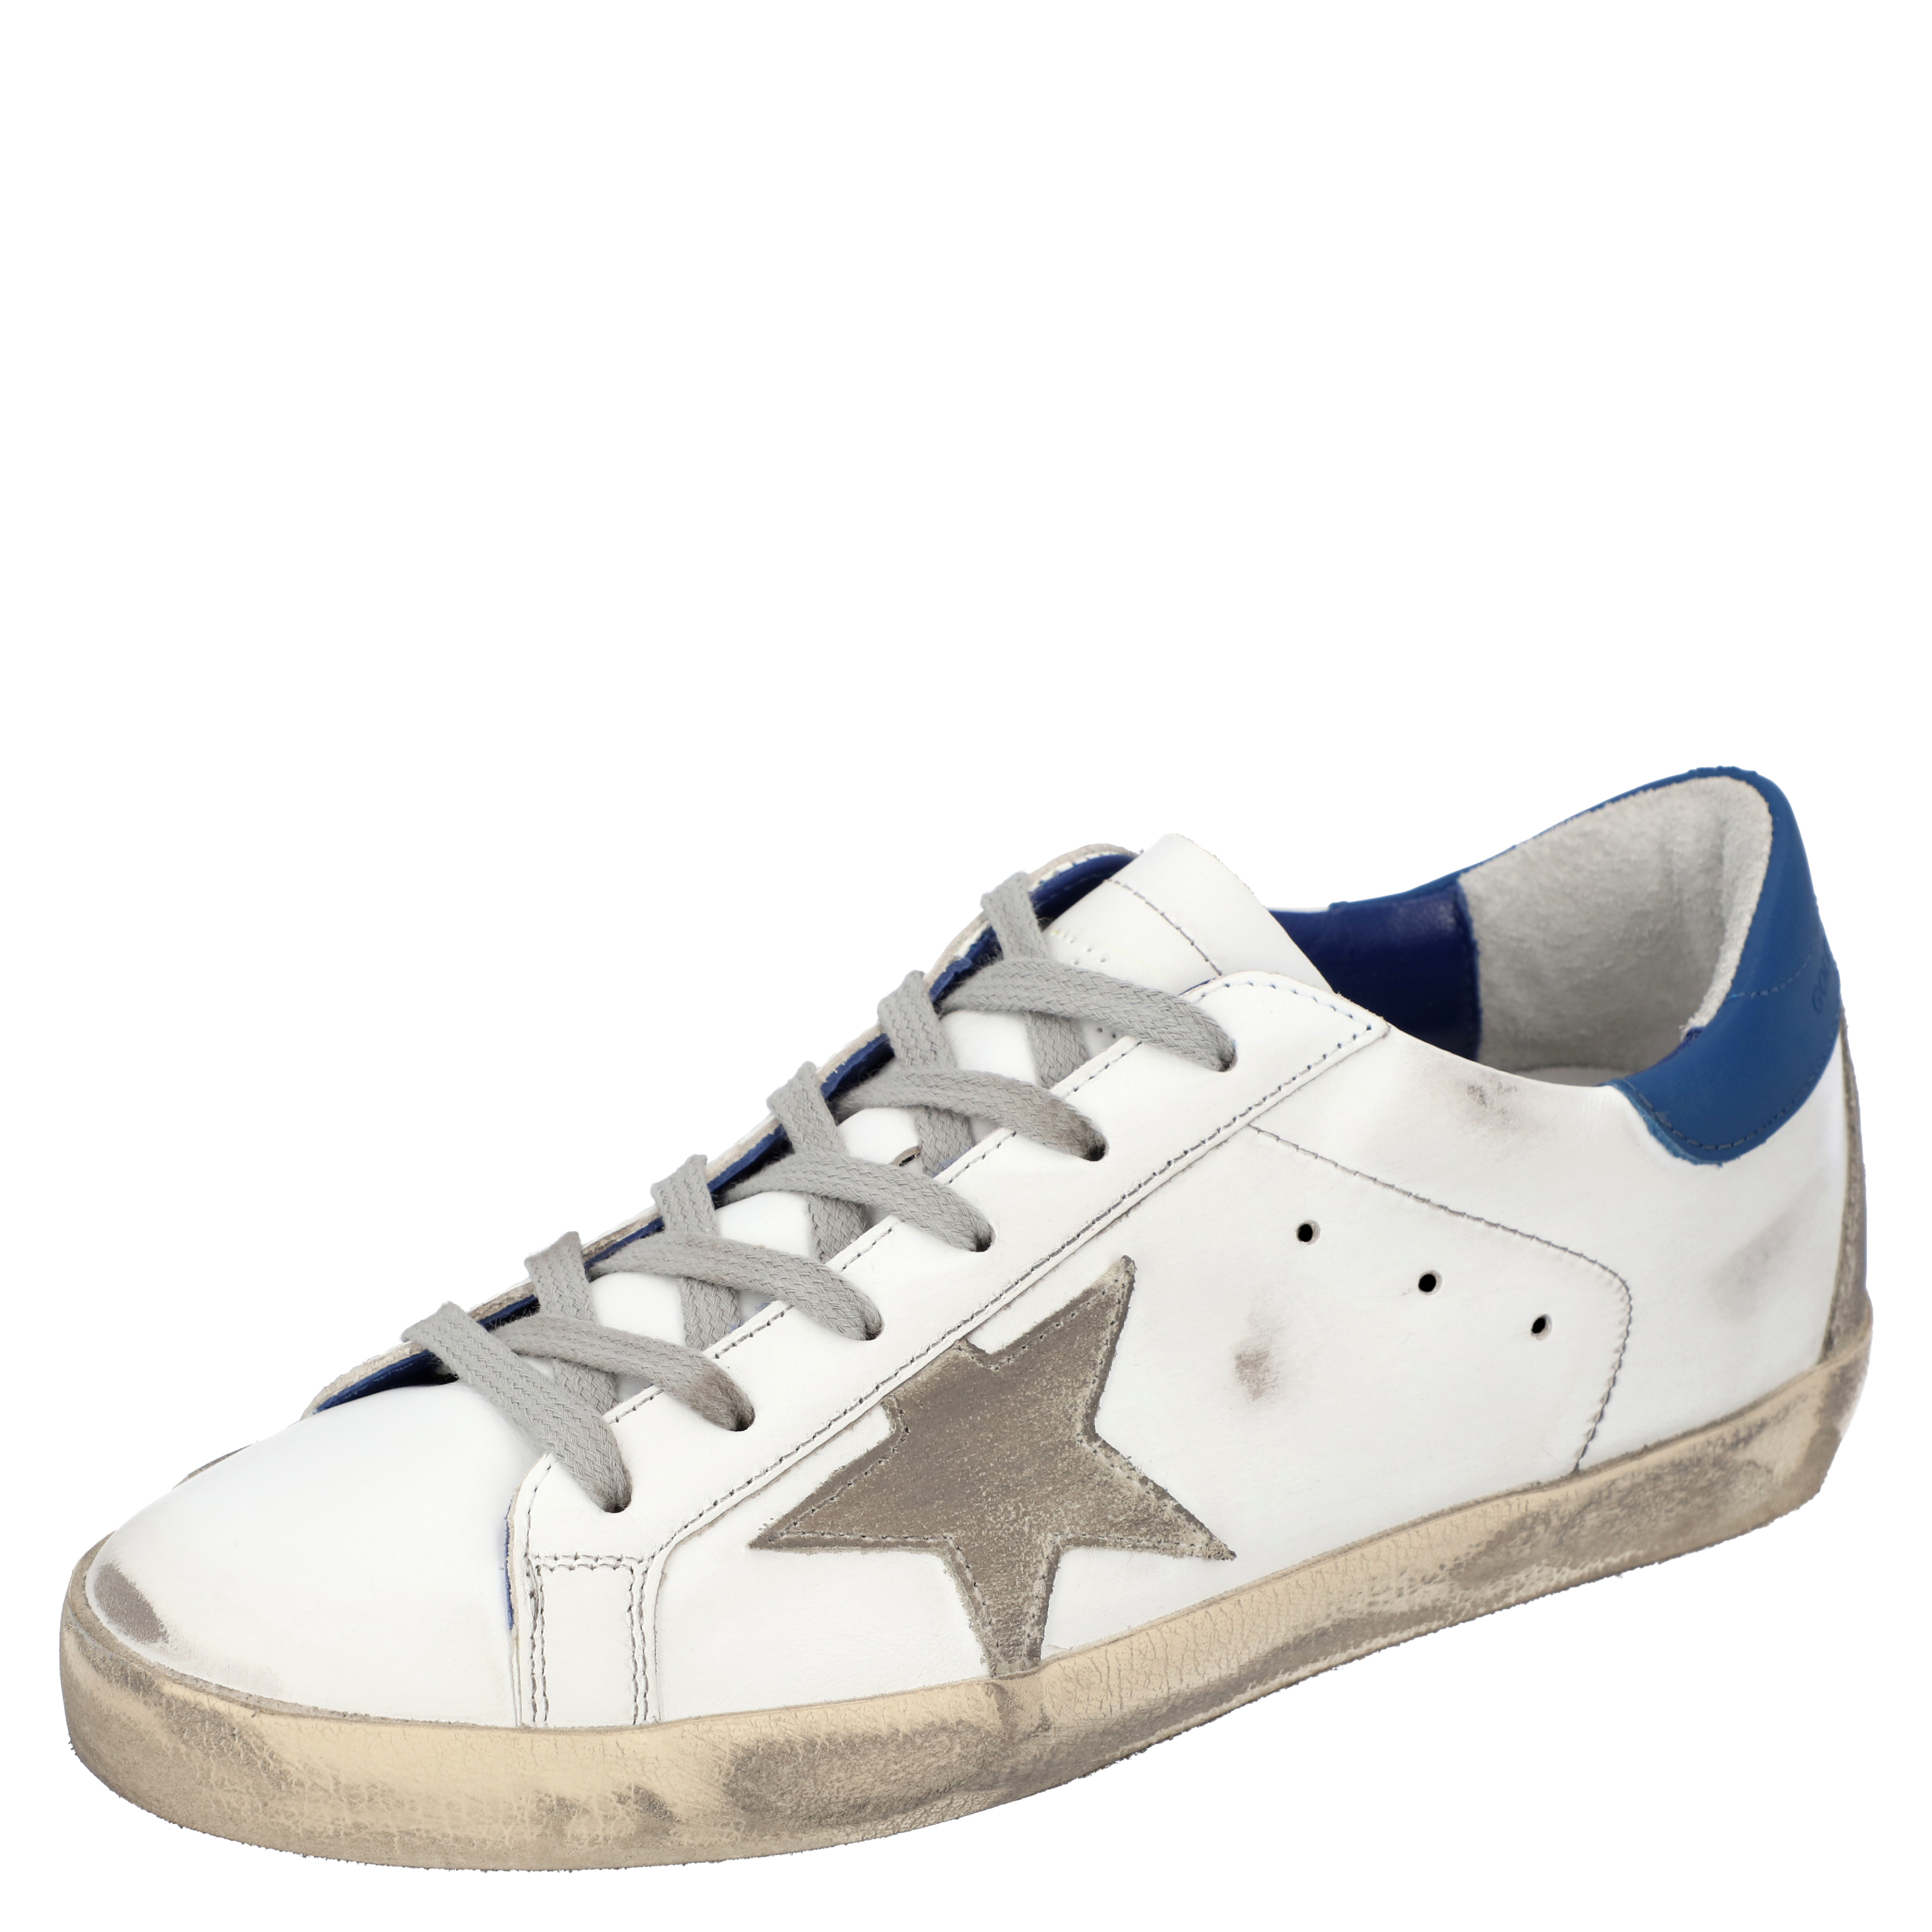 Golden Goose White/Blue Leather Superstar Sneakers Size EU 39